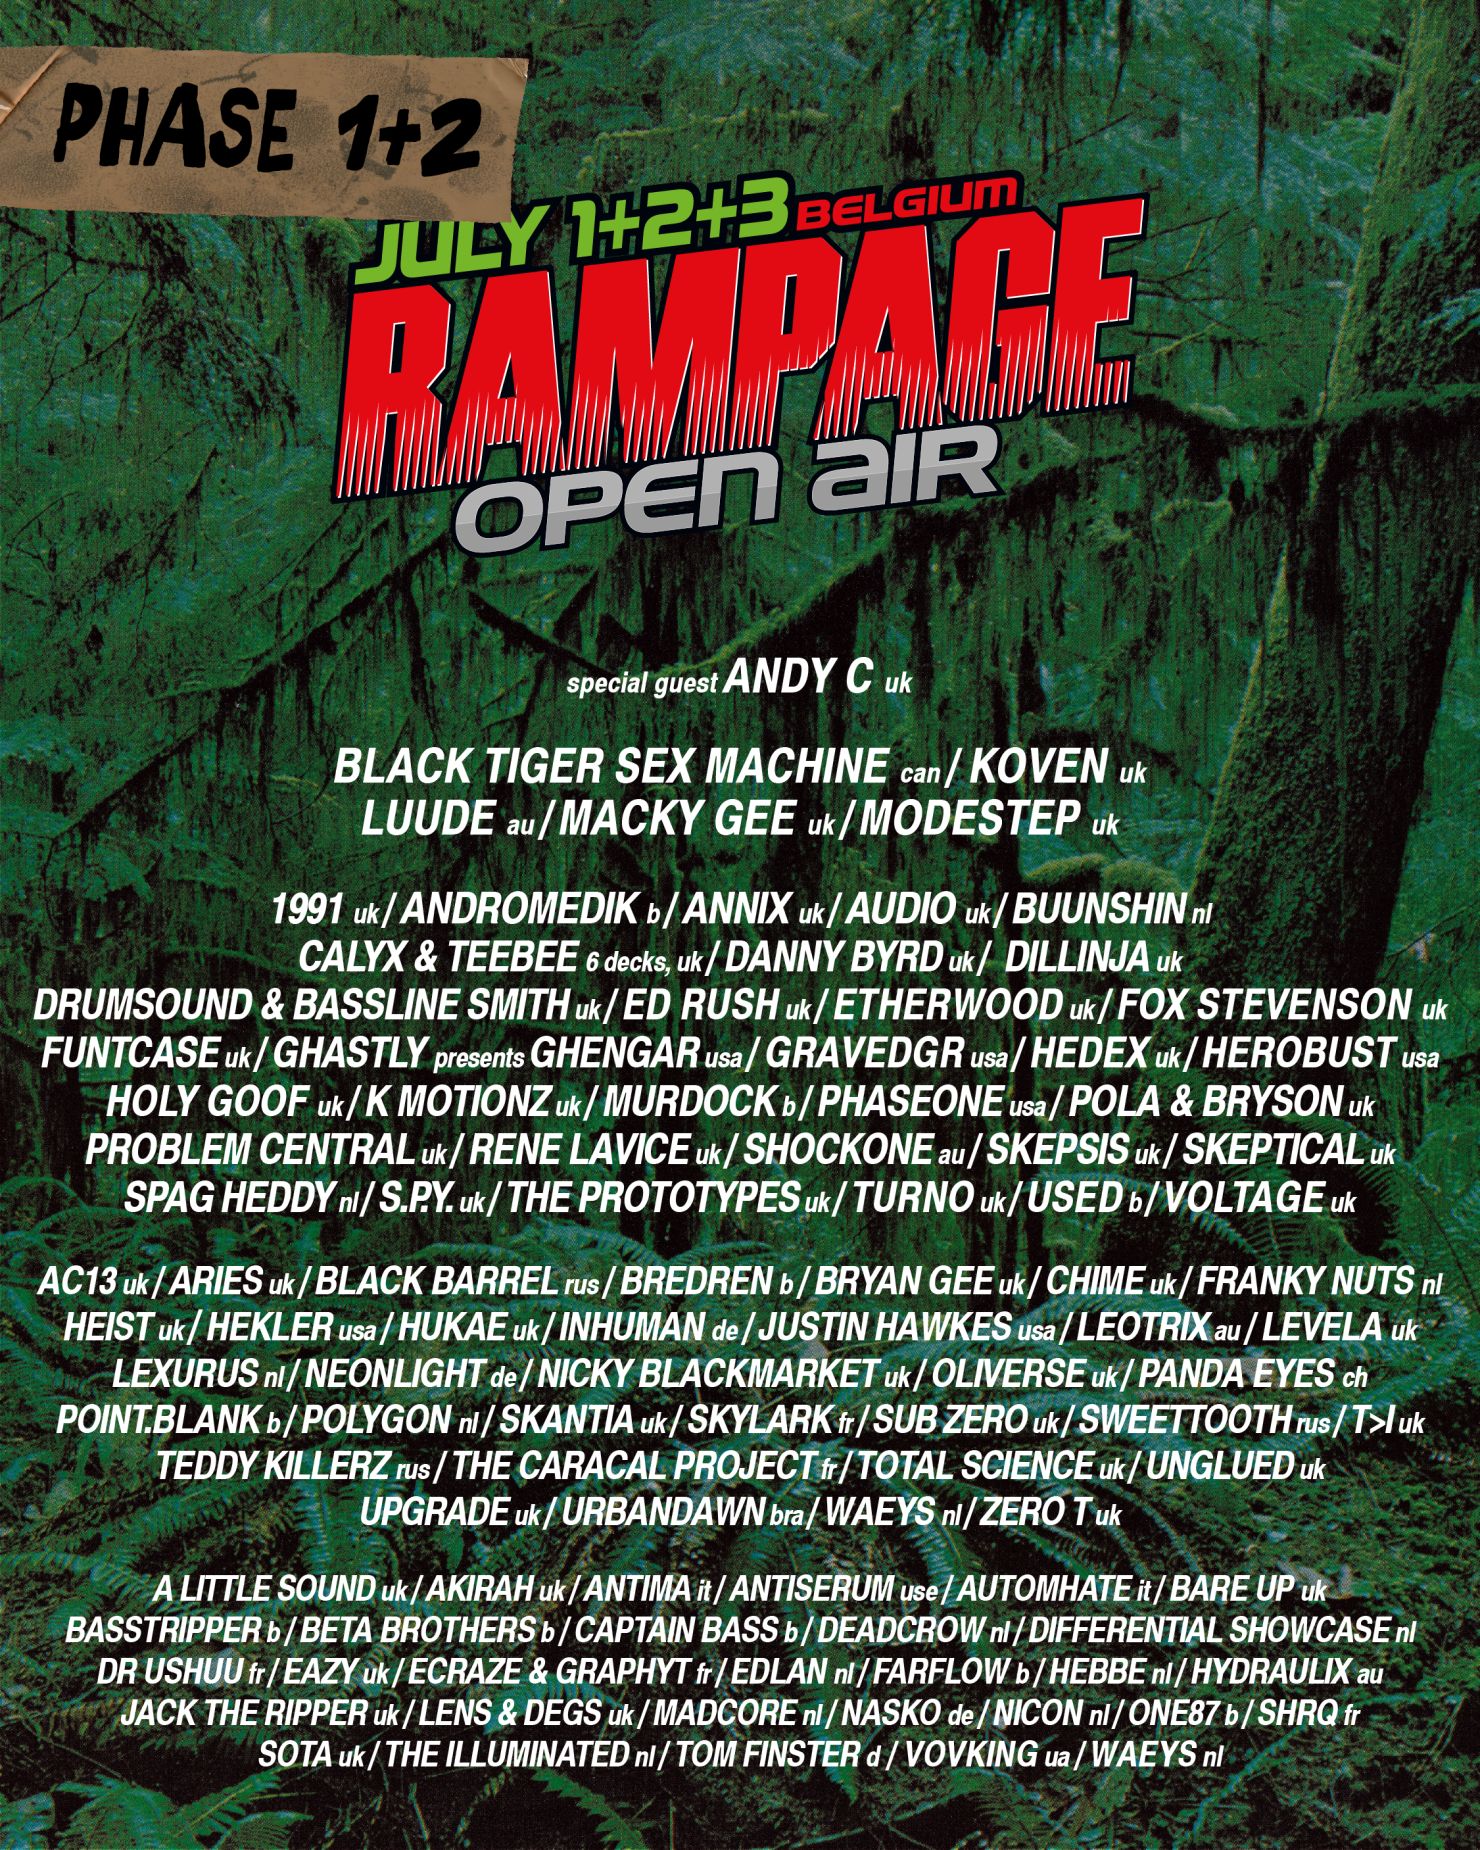 Phase 2 line up release for Rampage Open Air